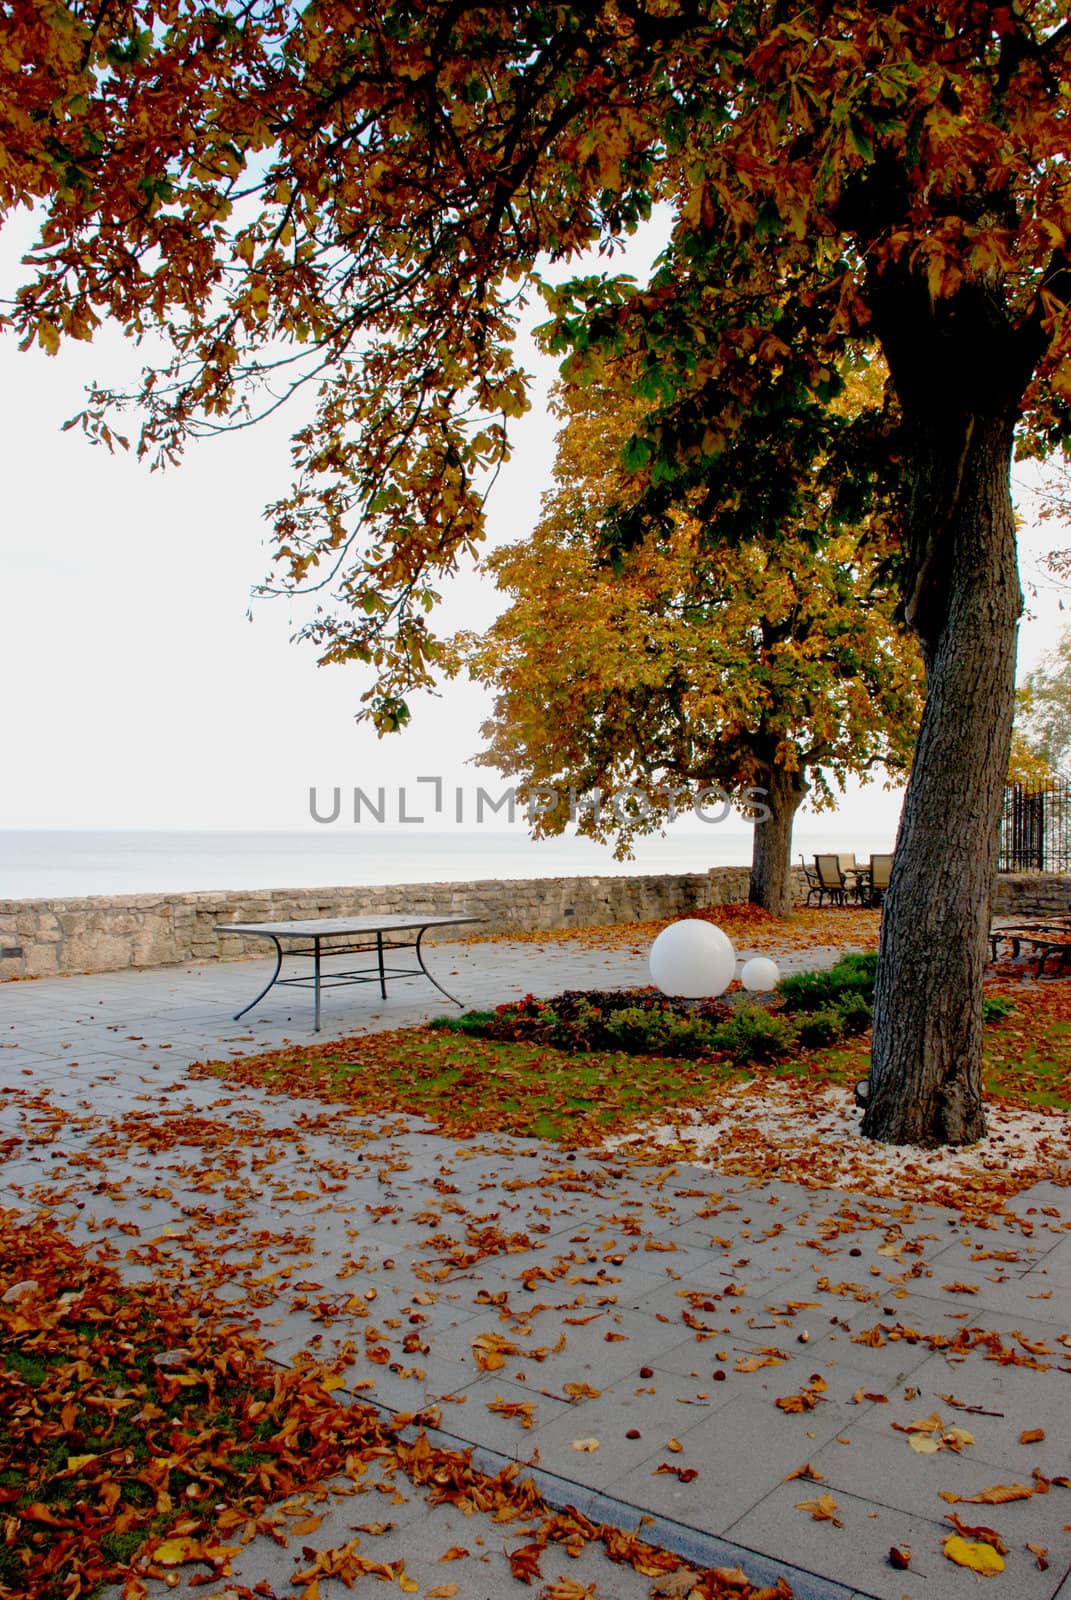 There are only leaves and wind left in late autumn seaside villas